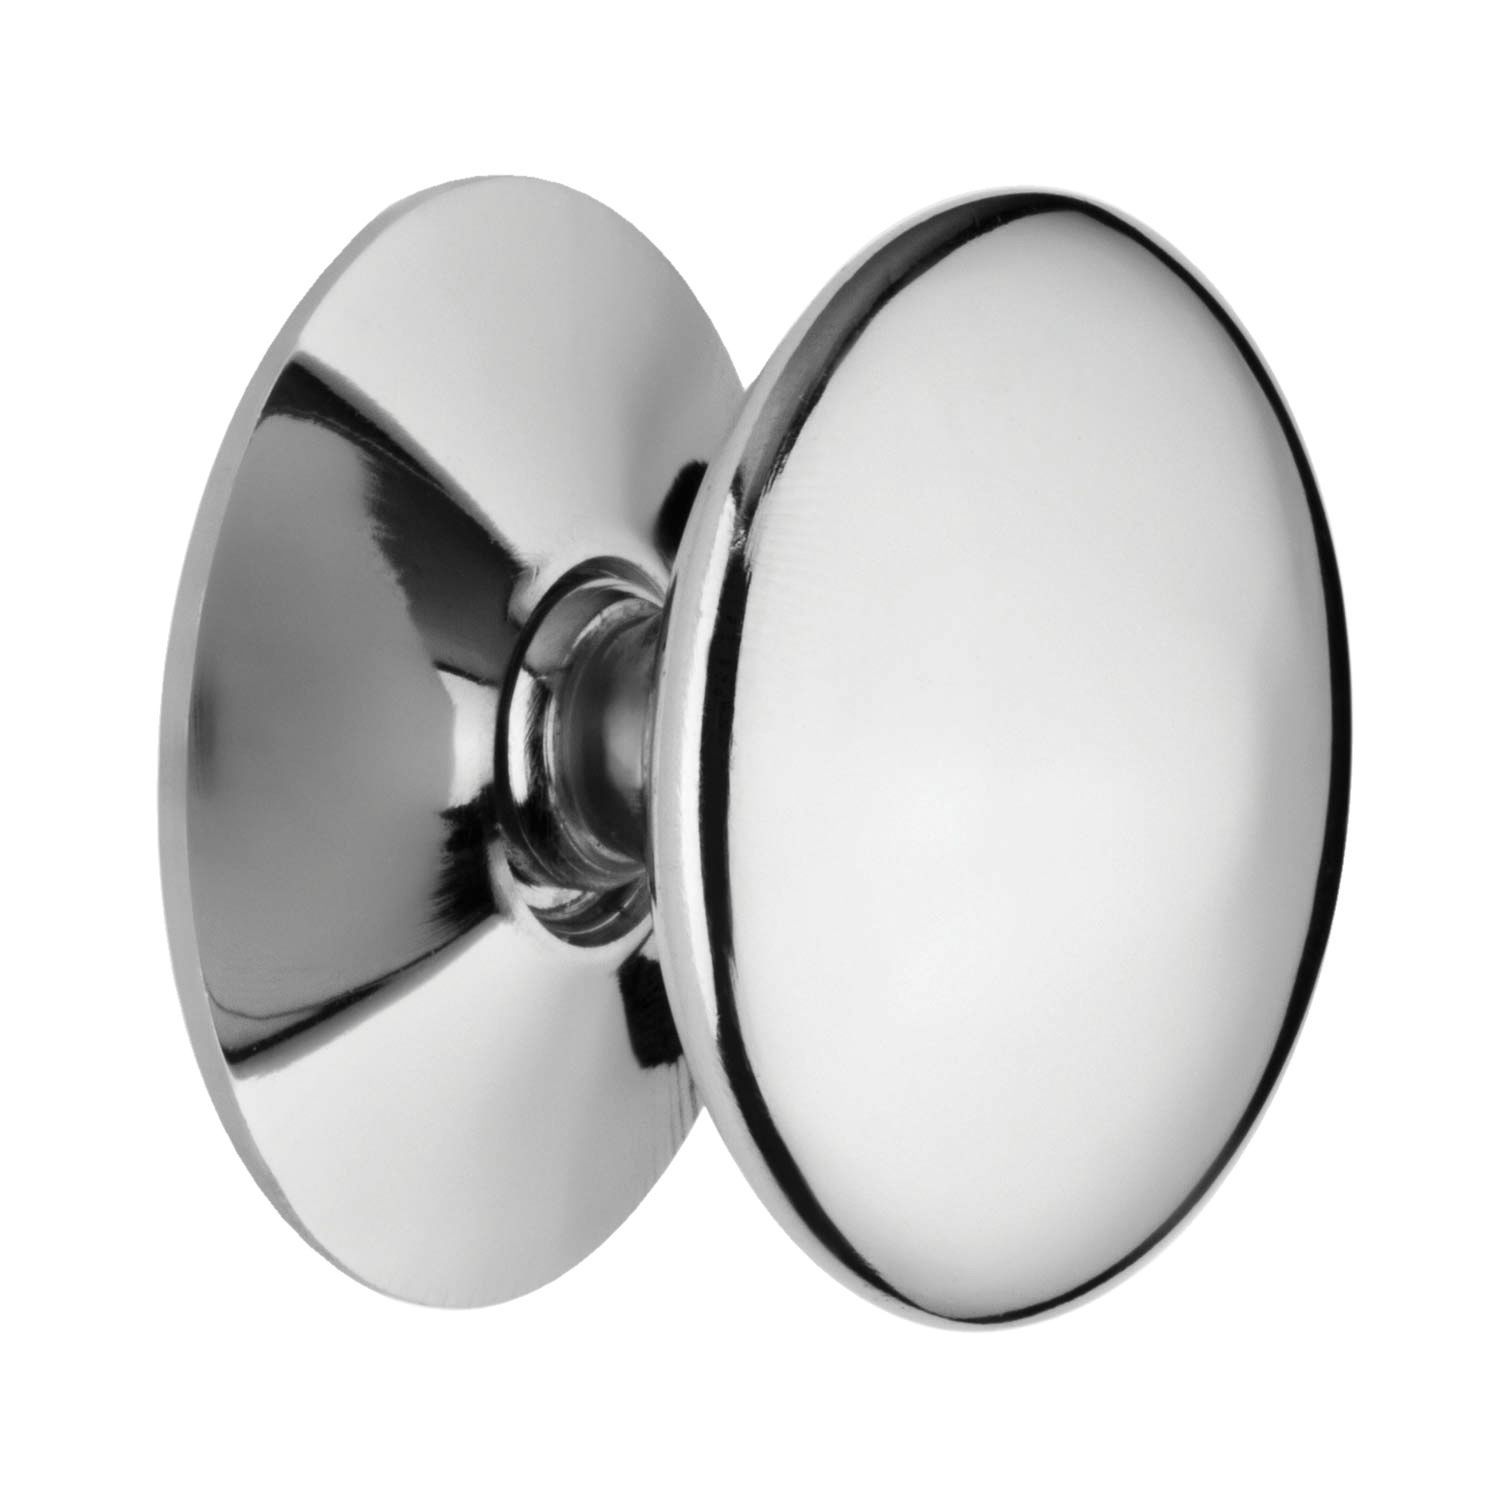 Image of Wickes Victorian Cabinet Door Knob - Chrome 38mm Pack of 4